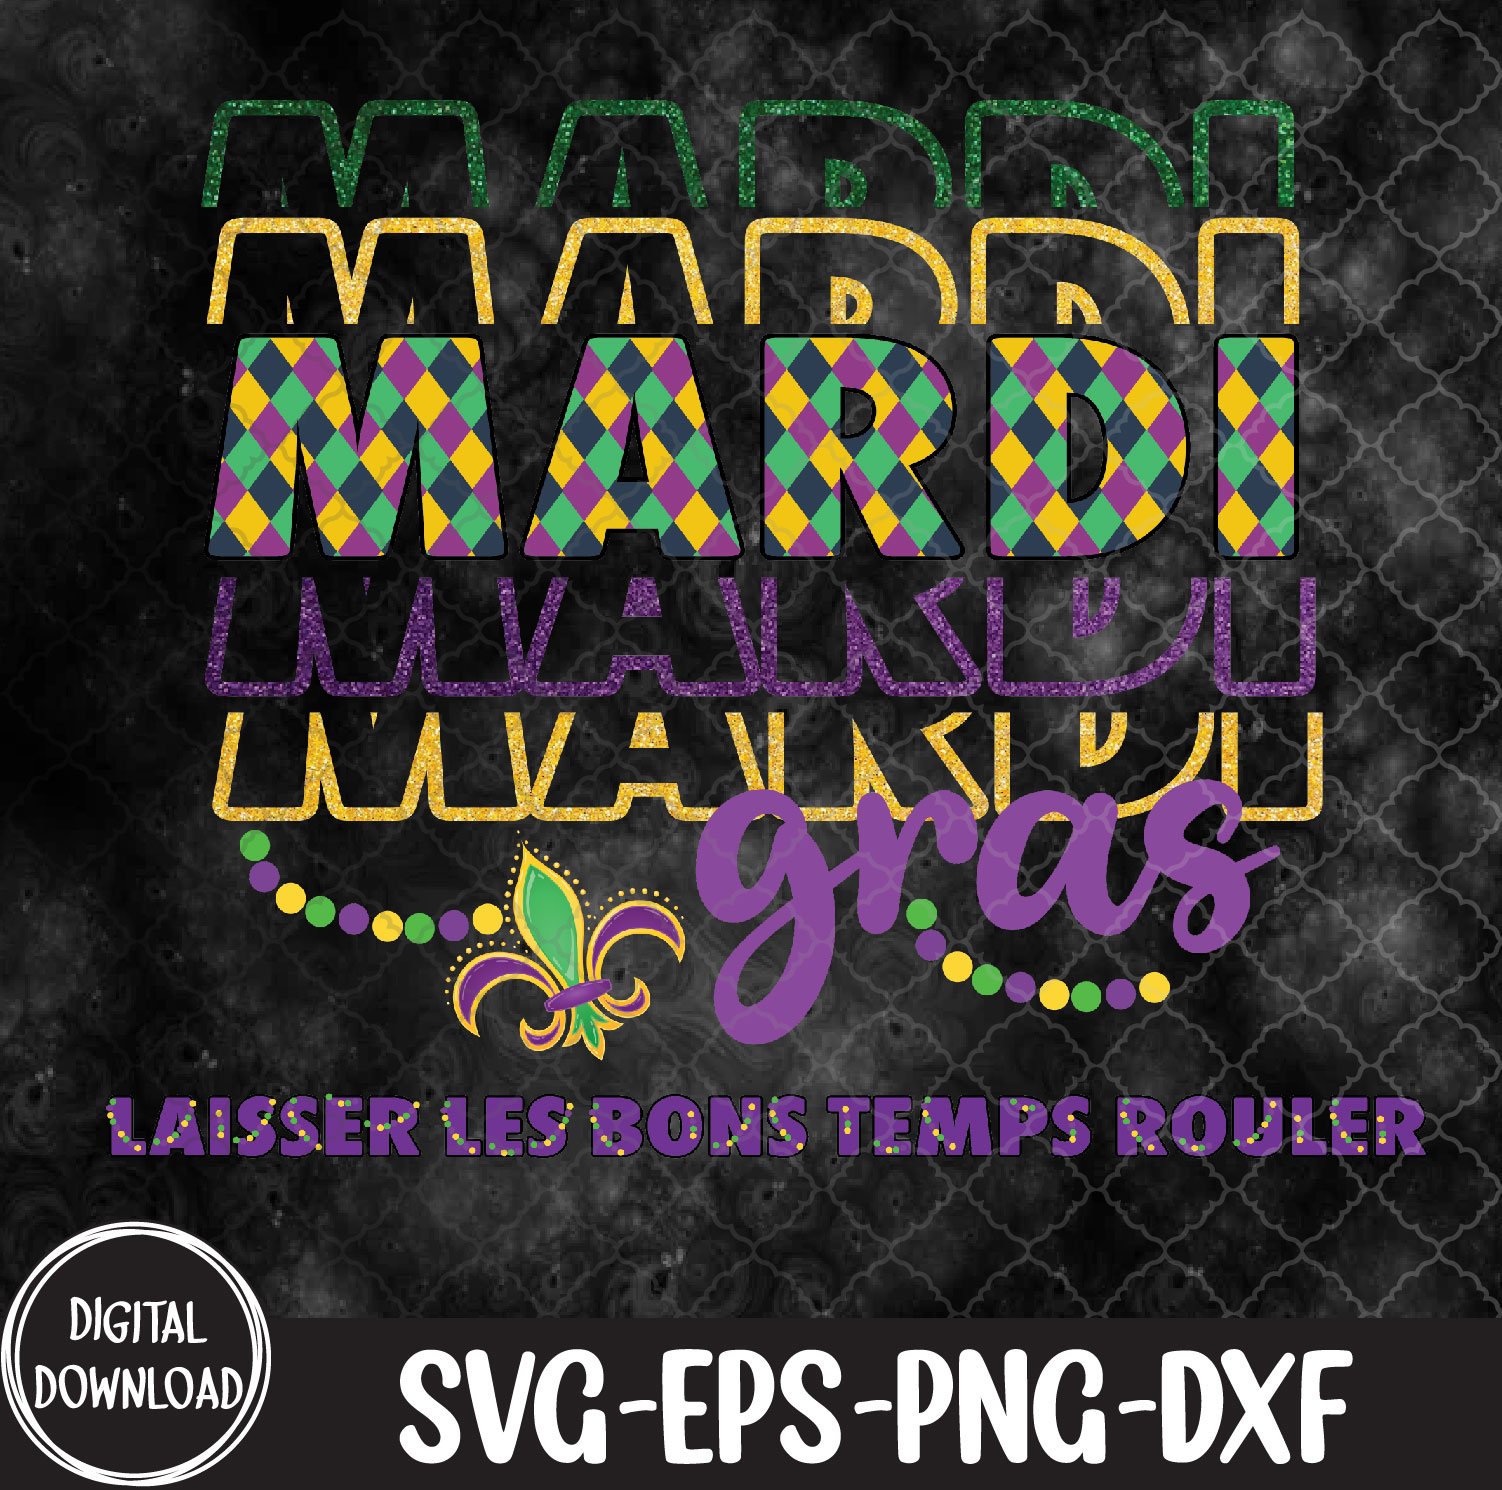 WTMNEW1512 09 5 Mardi Gras Party Costume Funny Mardi Gras svg, Svg, Eps, Png, Dxf